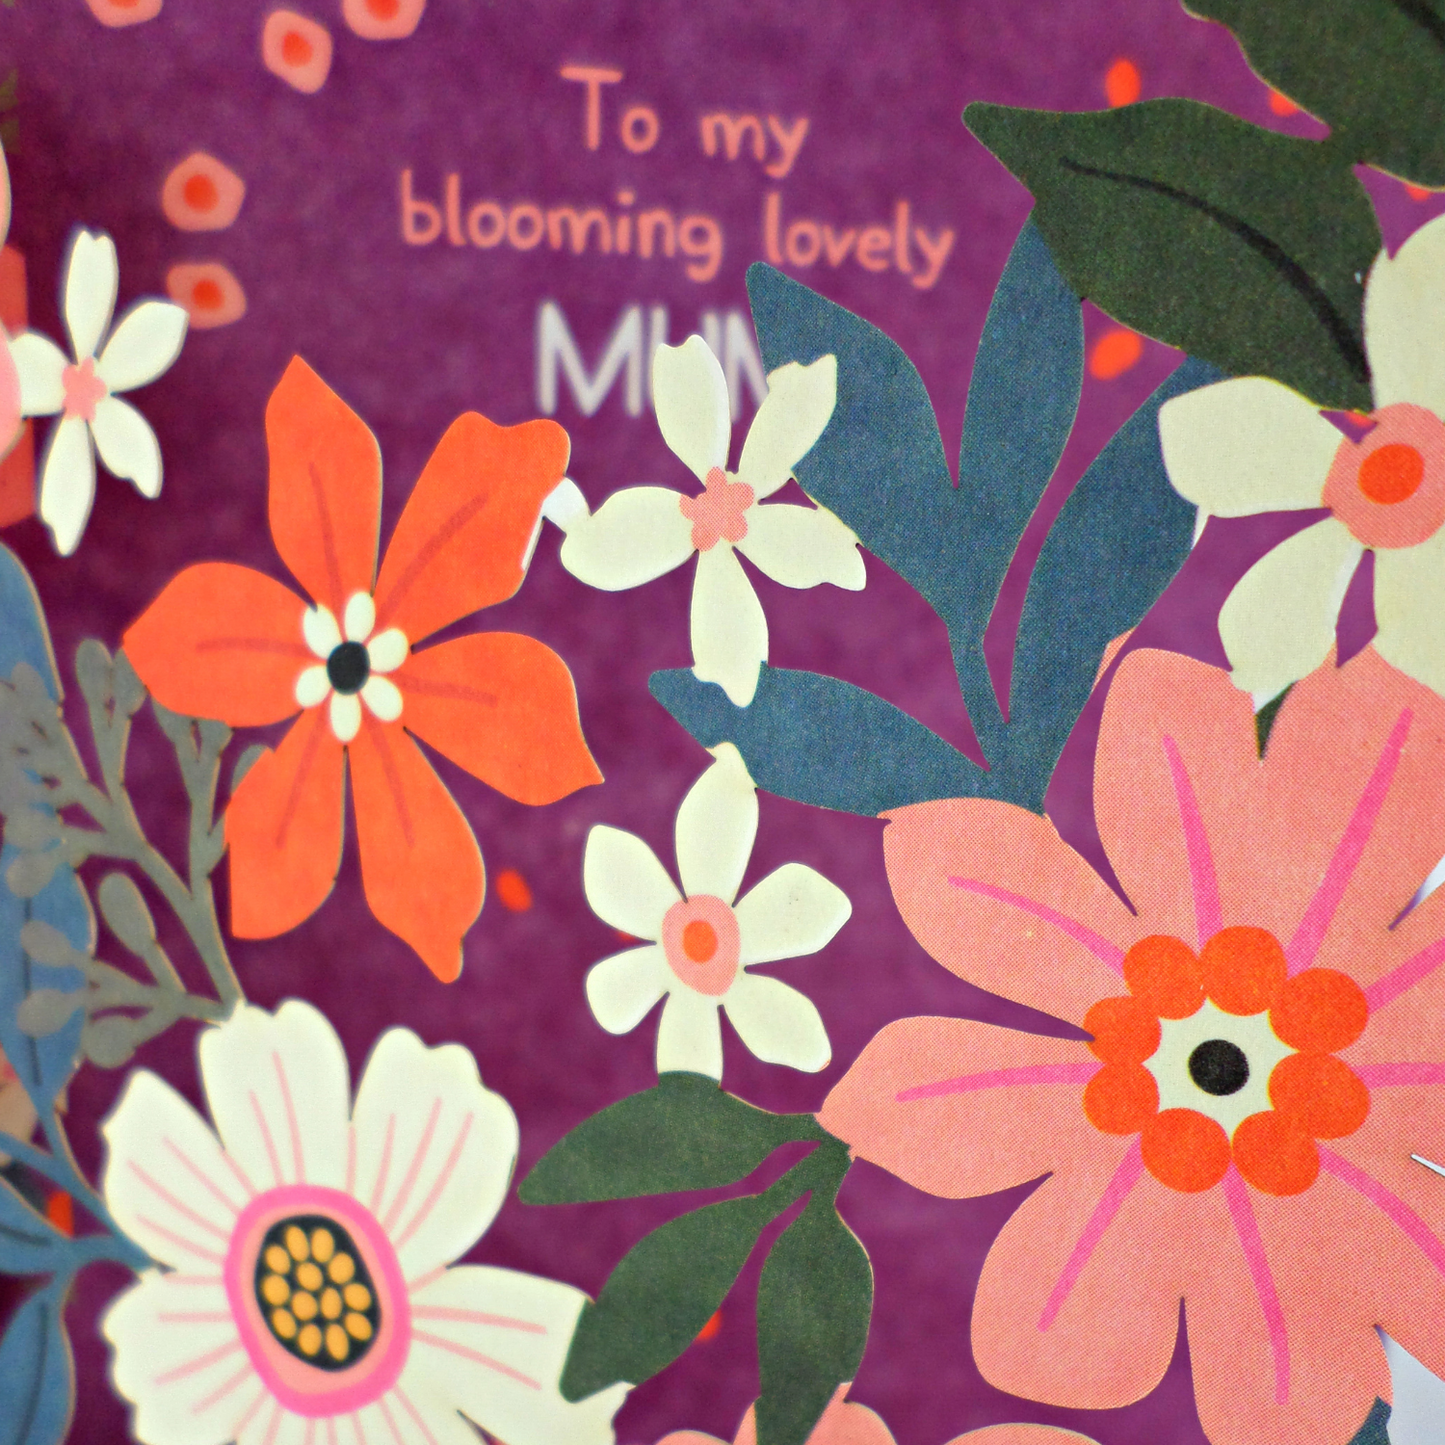 Paper Cut Art Blooming Lovely Mum Any Occasion Greeting Card